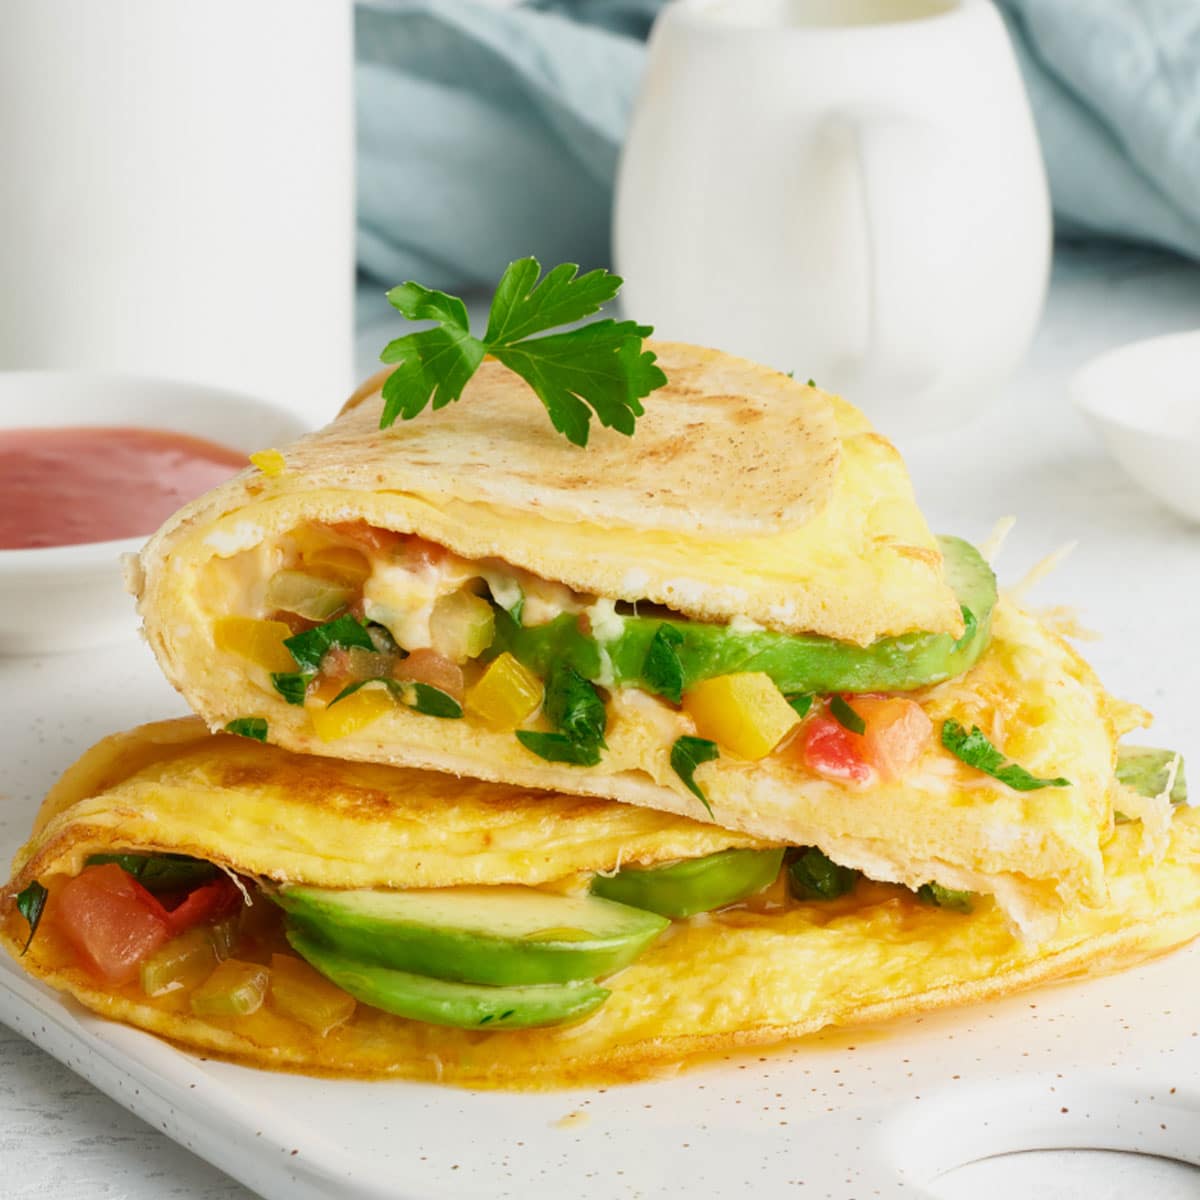 Omelets are a beloved breakfast dish, but sometimes they can be a little time-consuming to make. If you're short on time in the morning, you might wonder if it's possible to freeze omelets.